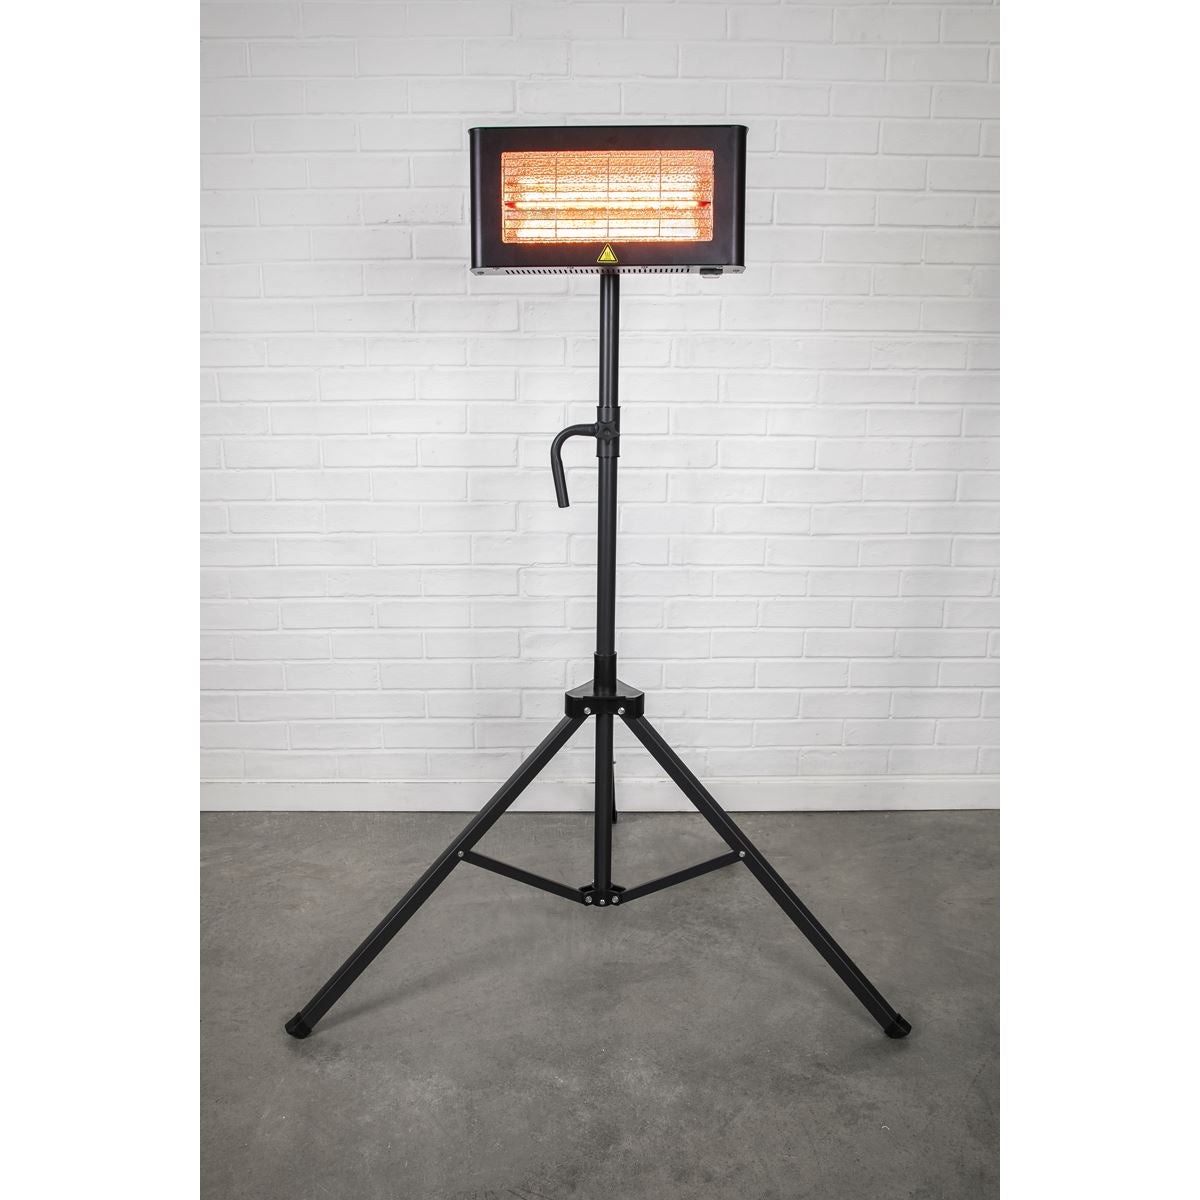 Sealey Infrared Quartz Heater with Tripod Stand 230V 1.2kW